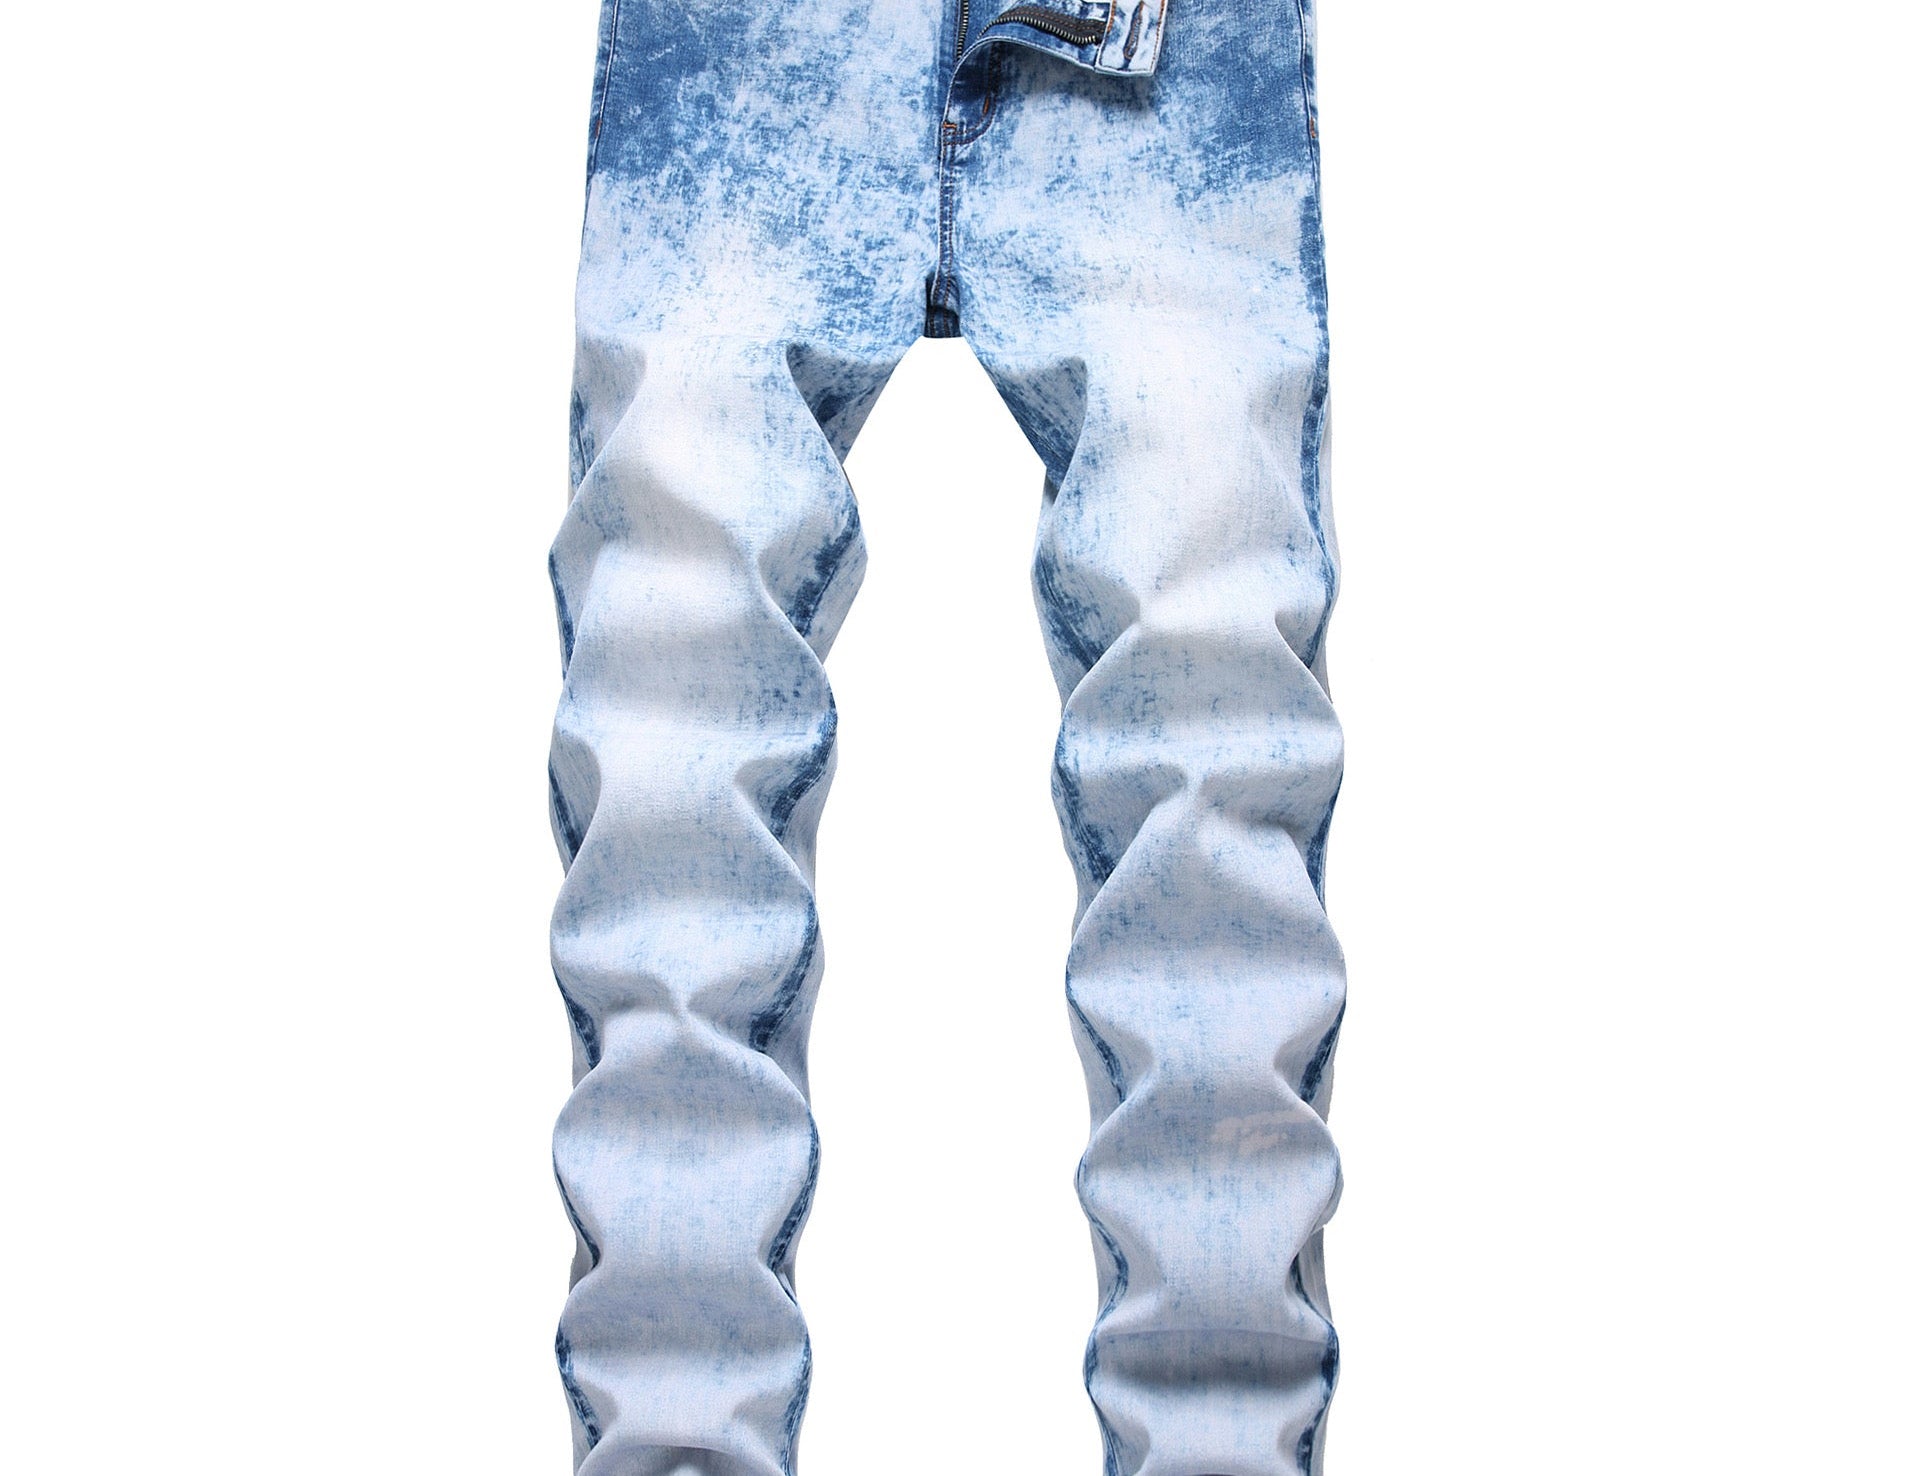 FOOK - Denim Jeans for Men - Sarman Fashion - Wholesale Clothing Fashion Brand for Men from Canada